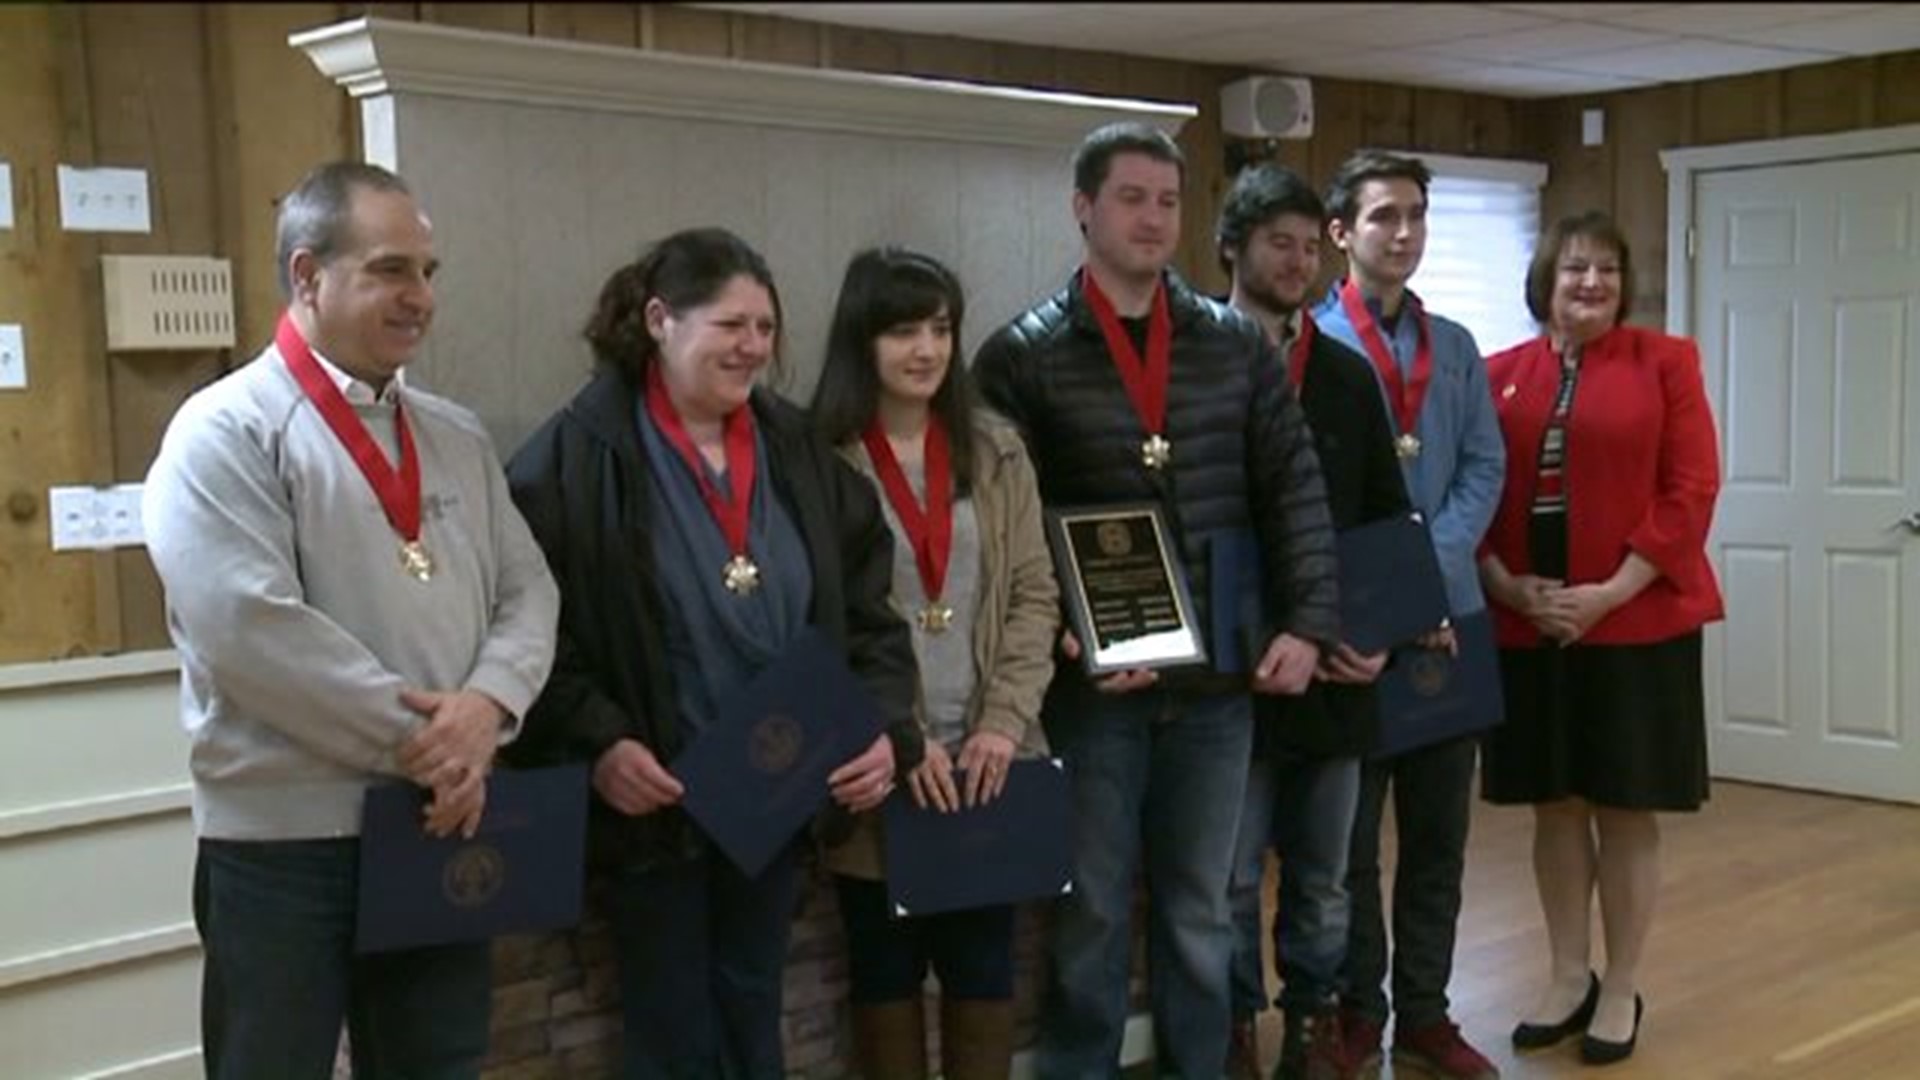 Recognizing Heroes for Saving Lives During Fire